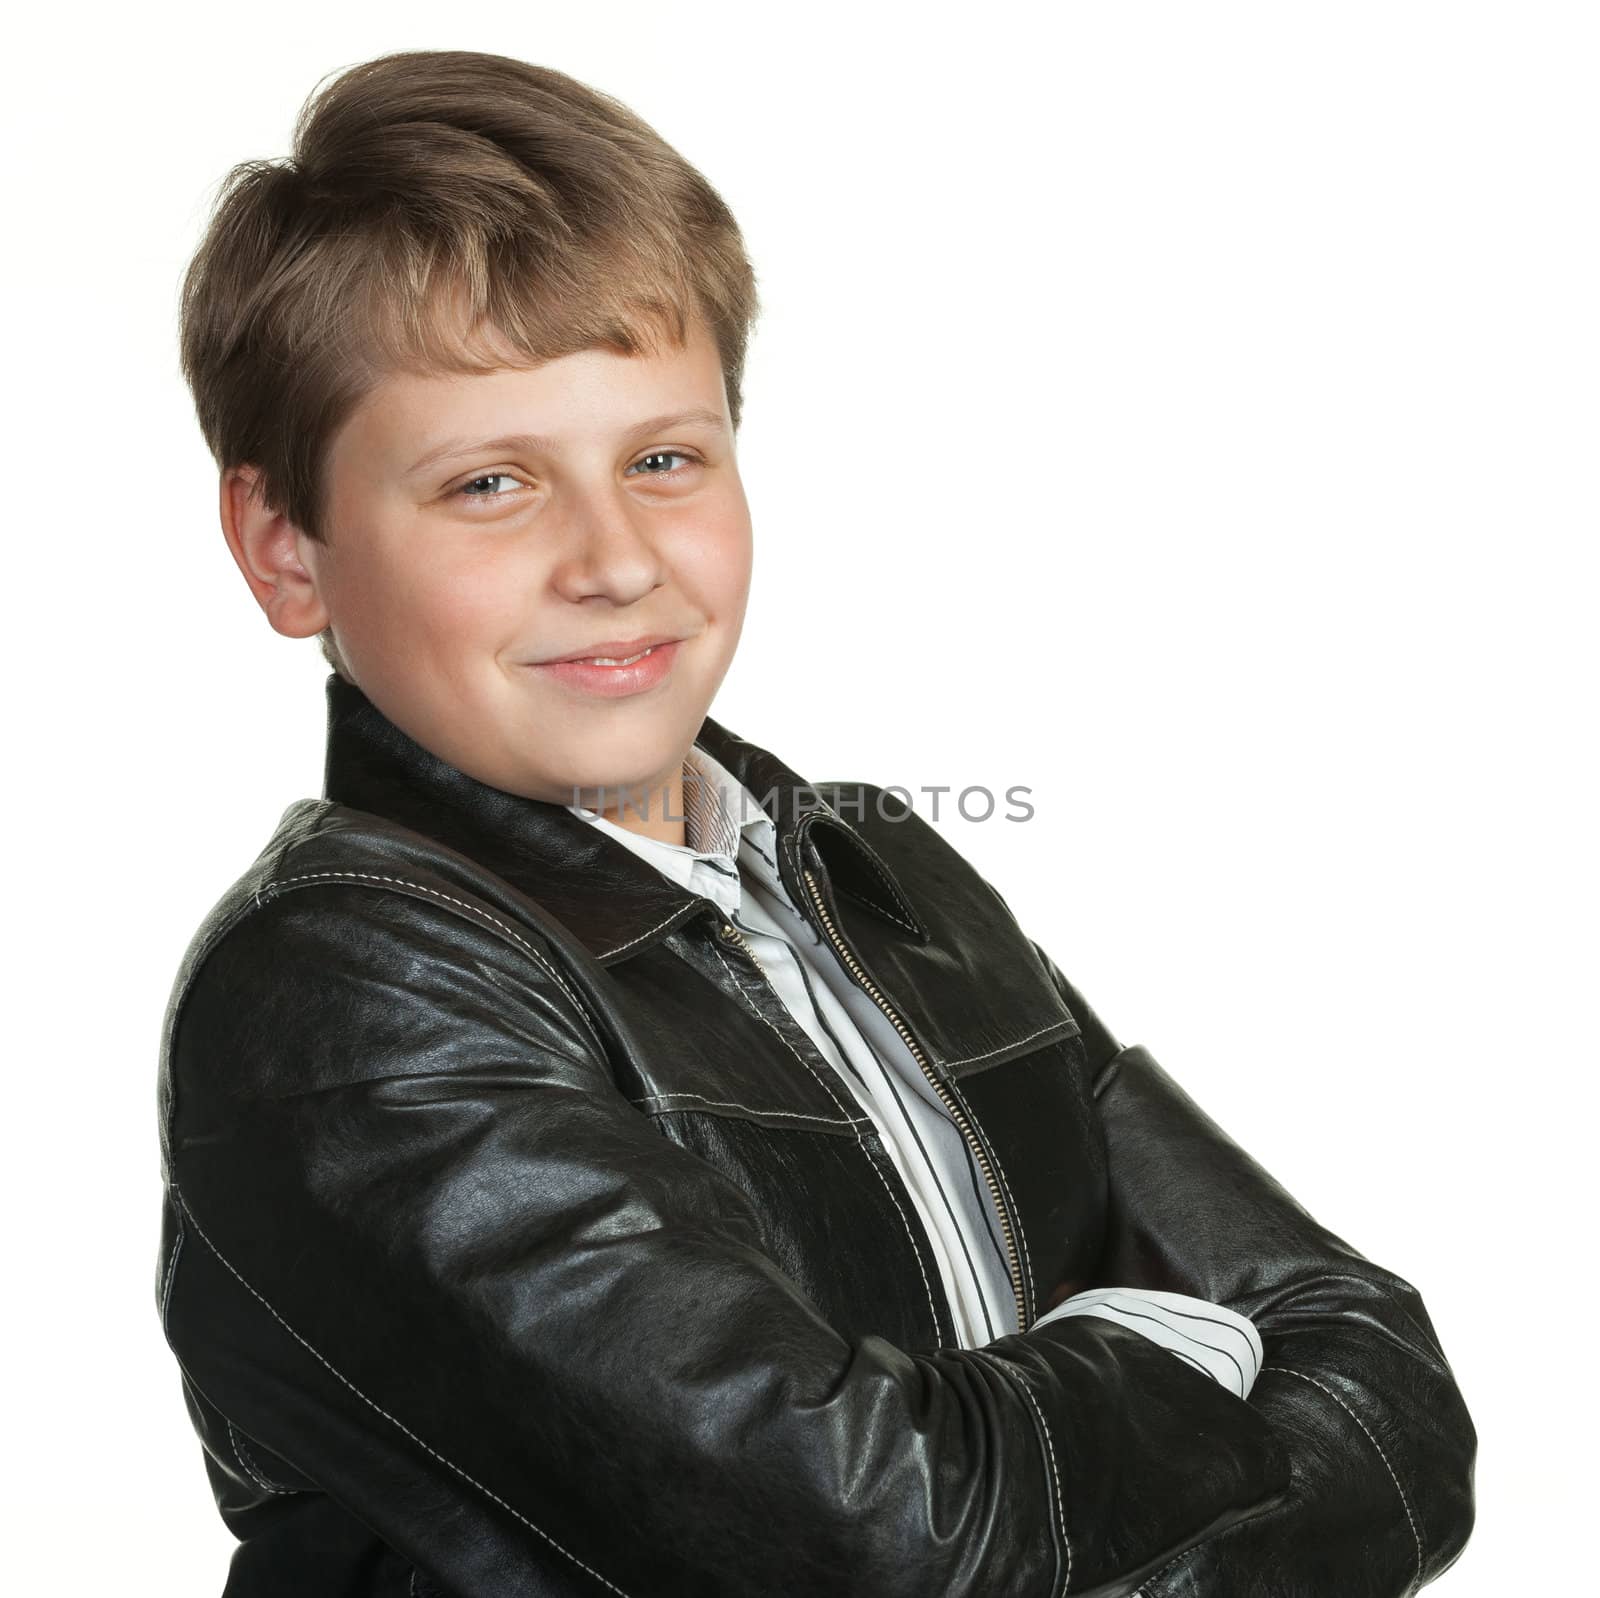 Portrait of the teenager in a leather jacket. It is isolated on a white background